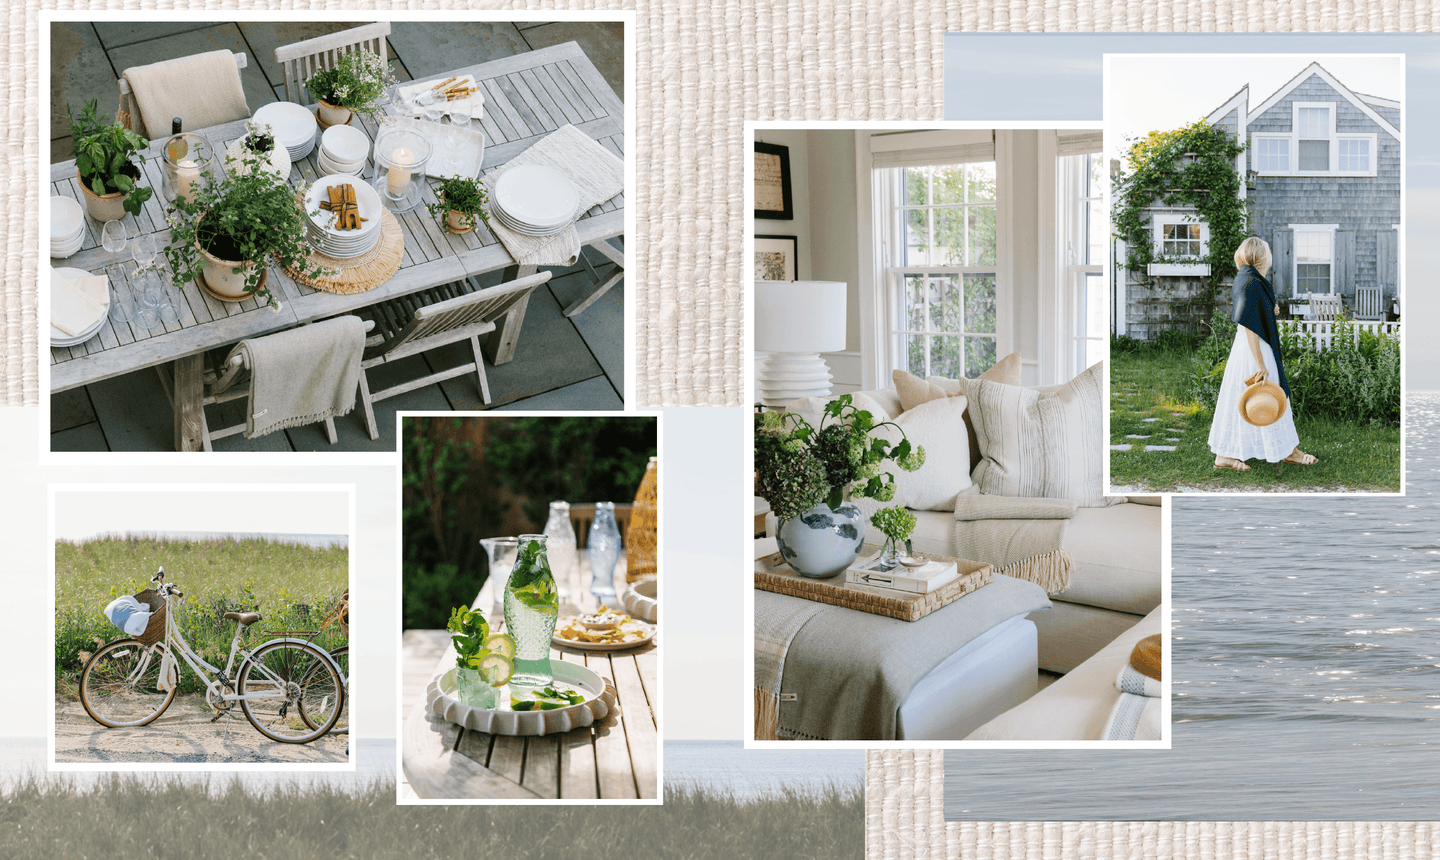 Embrace the serene beauty and timeless elegance of a Nantucket summer with our exclusive Summer Collection at Nantucket Looms. Our new arrivals are designed to capture the essence of coastal living, bringing a touch of Nantucket’s elegance into your home and lifestyle.